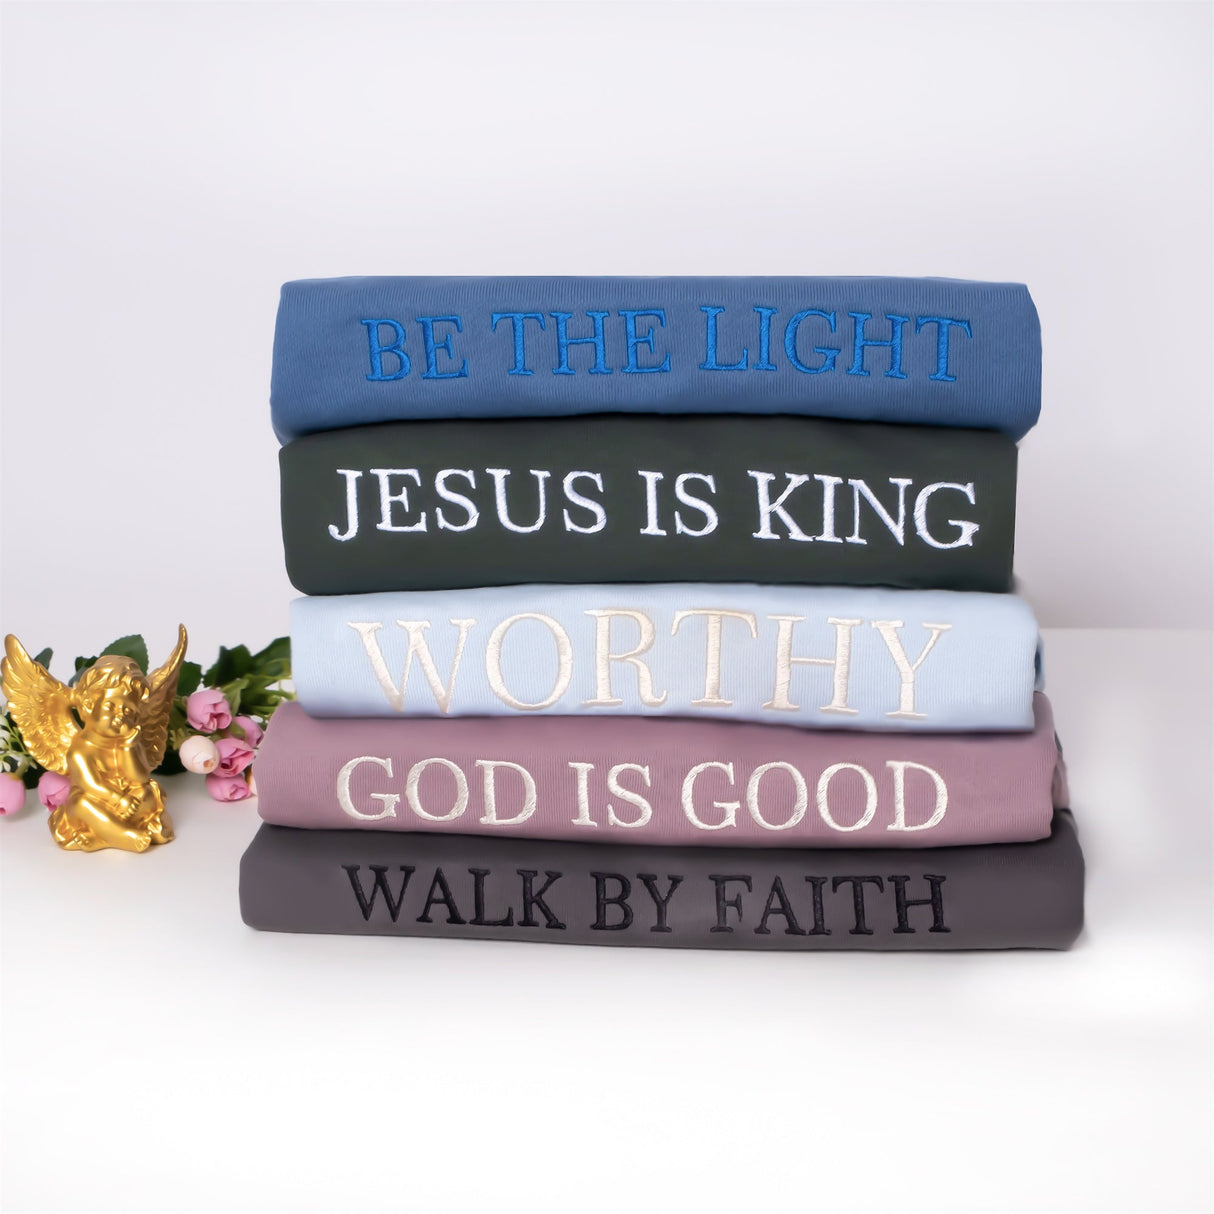 GEX Personalized Embroidered Christian Sweatshirts with GOD IS GOOD - GexWorldwide